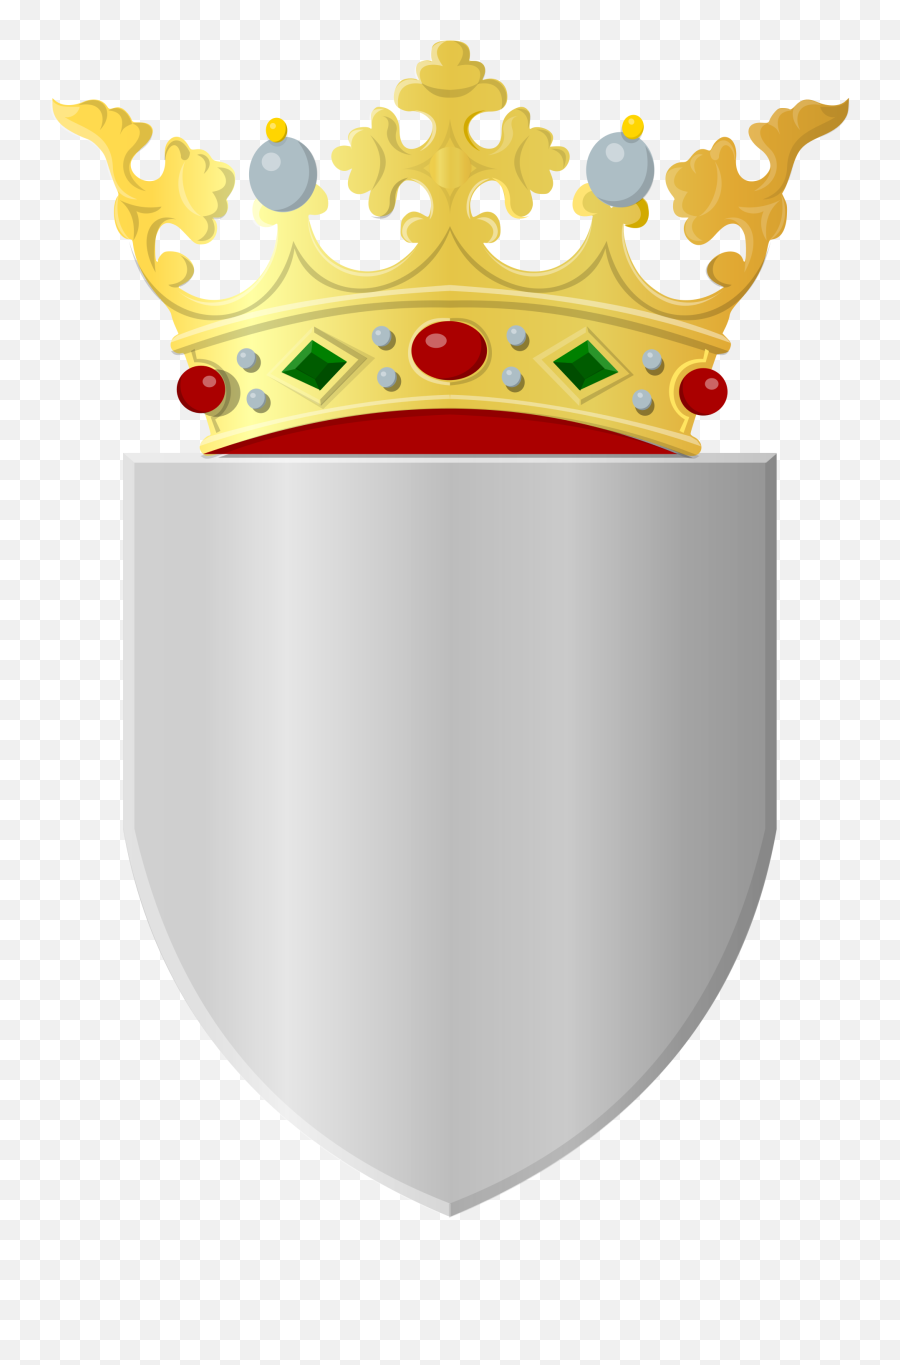 Filesilver Shield With Golden Crownsvg - Wikimedia Commons Shield Crown Transparent Png,Golden Crown Png